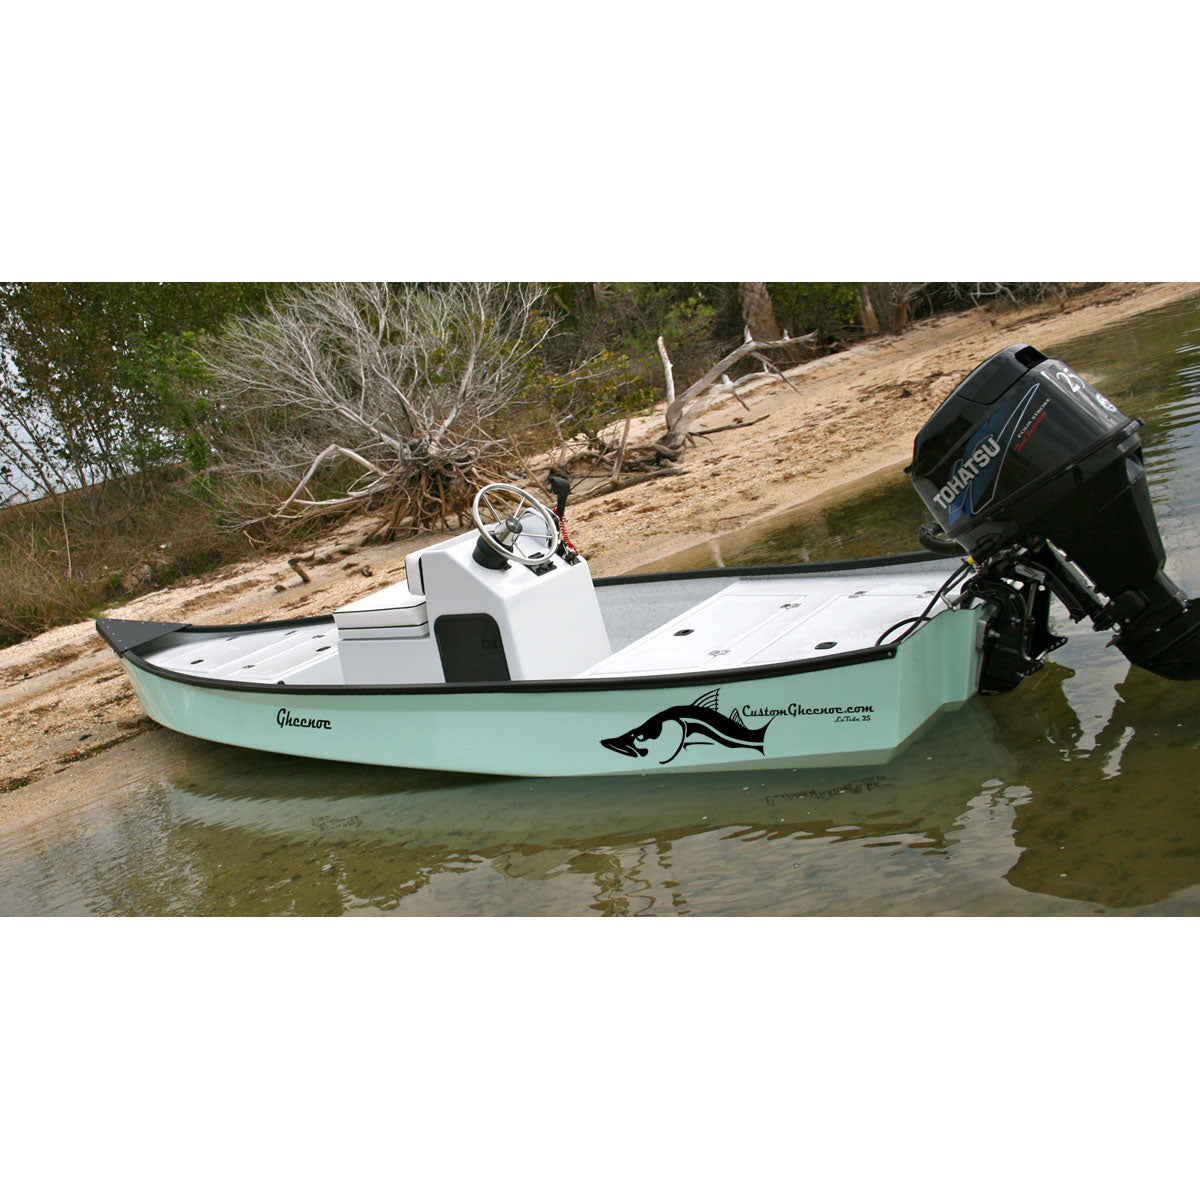 Snook Decal by Skiff Life in Black or White - Skiff Life